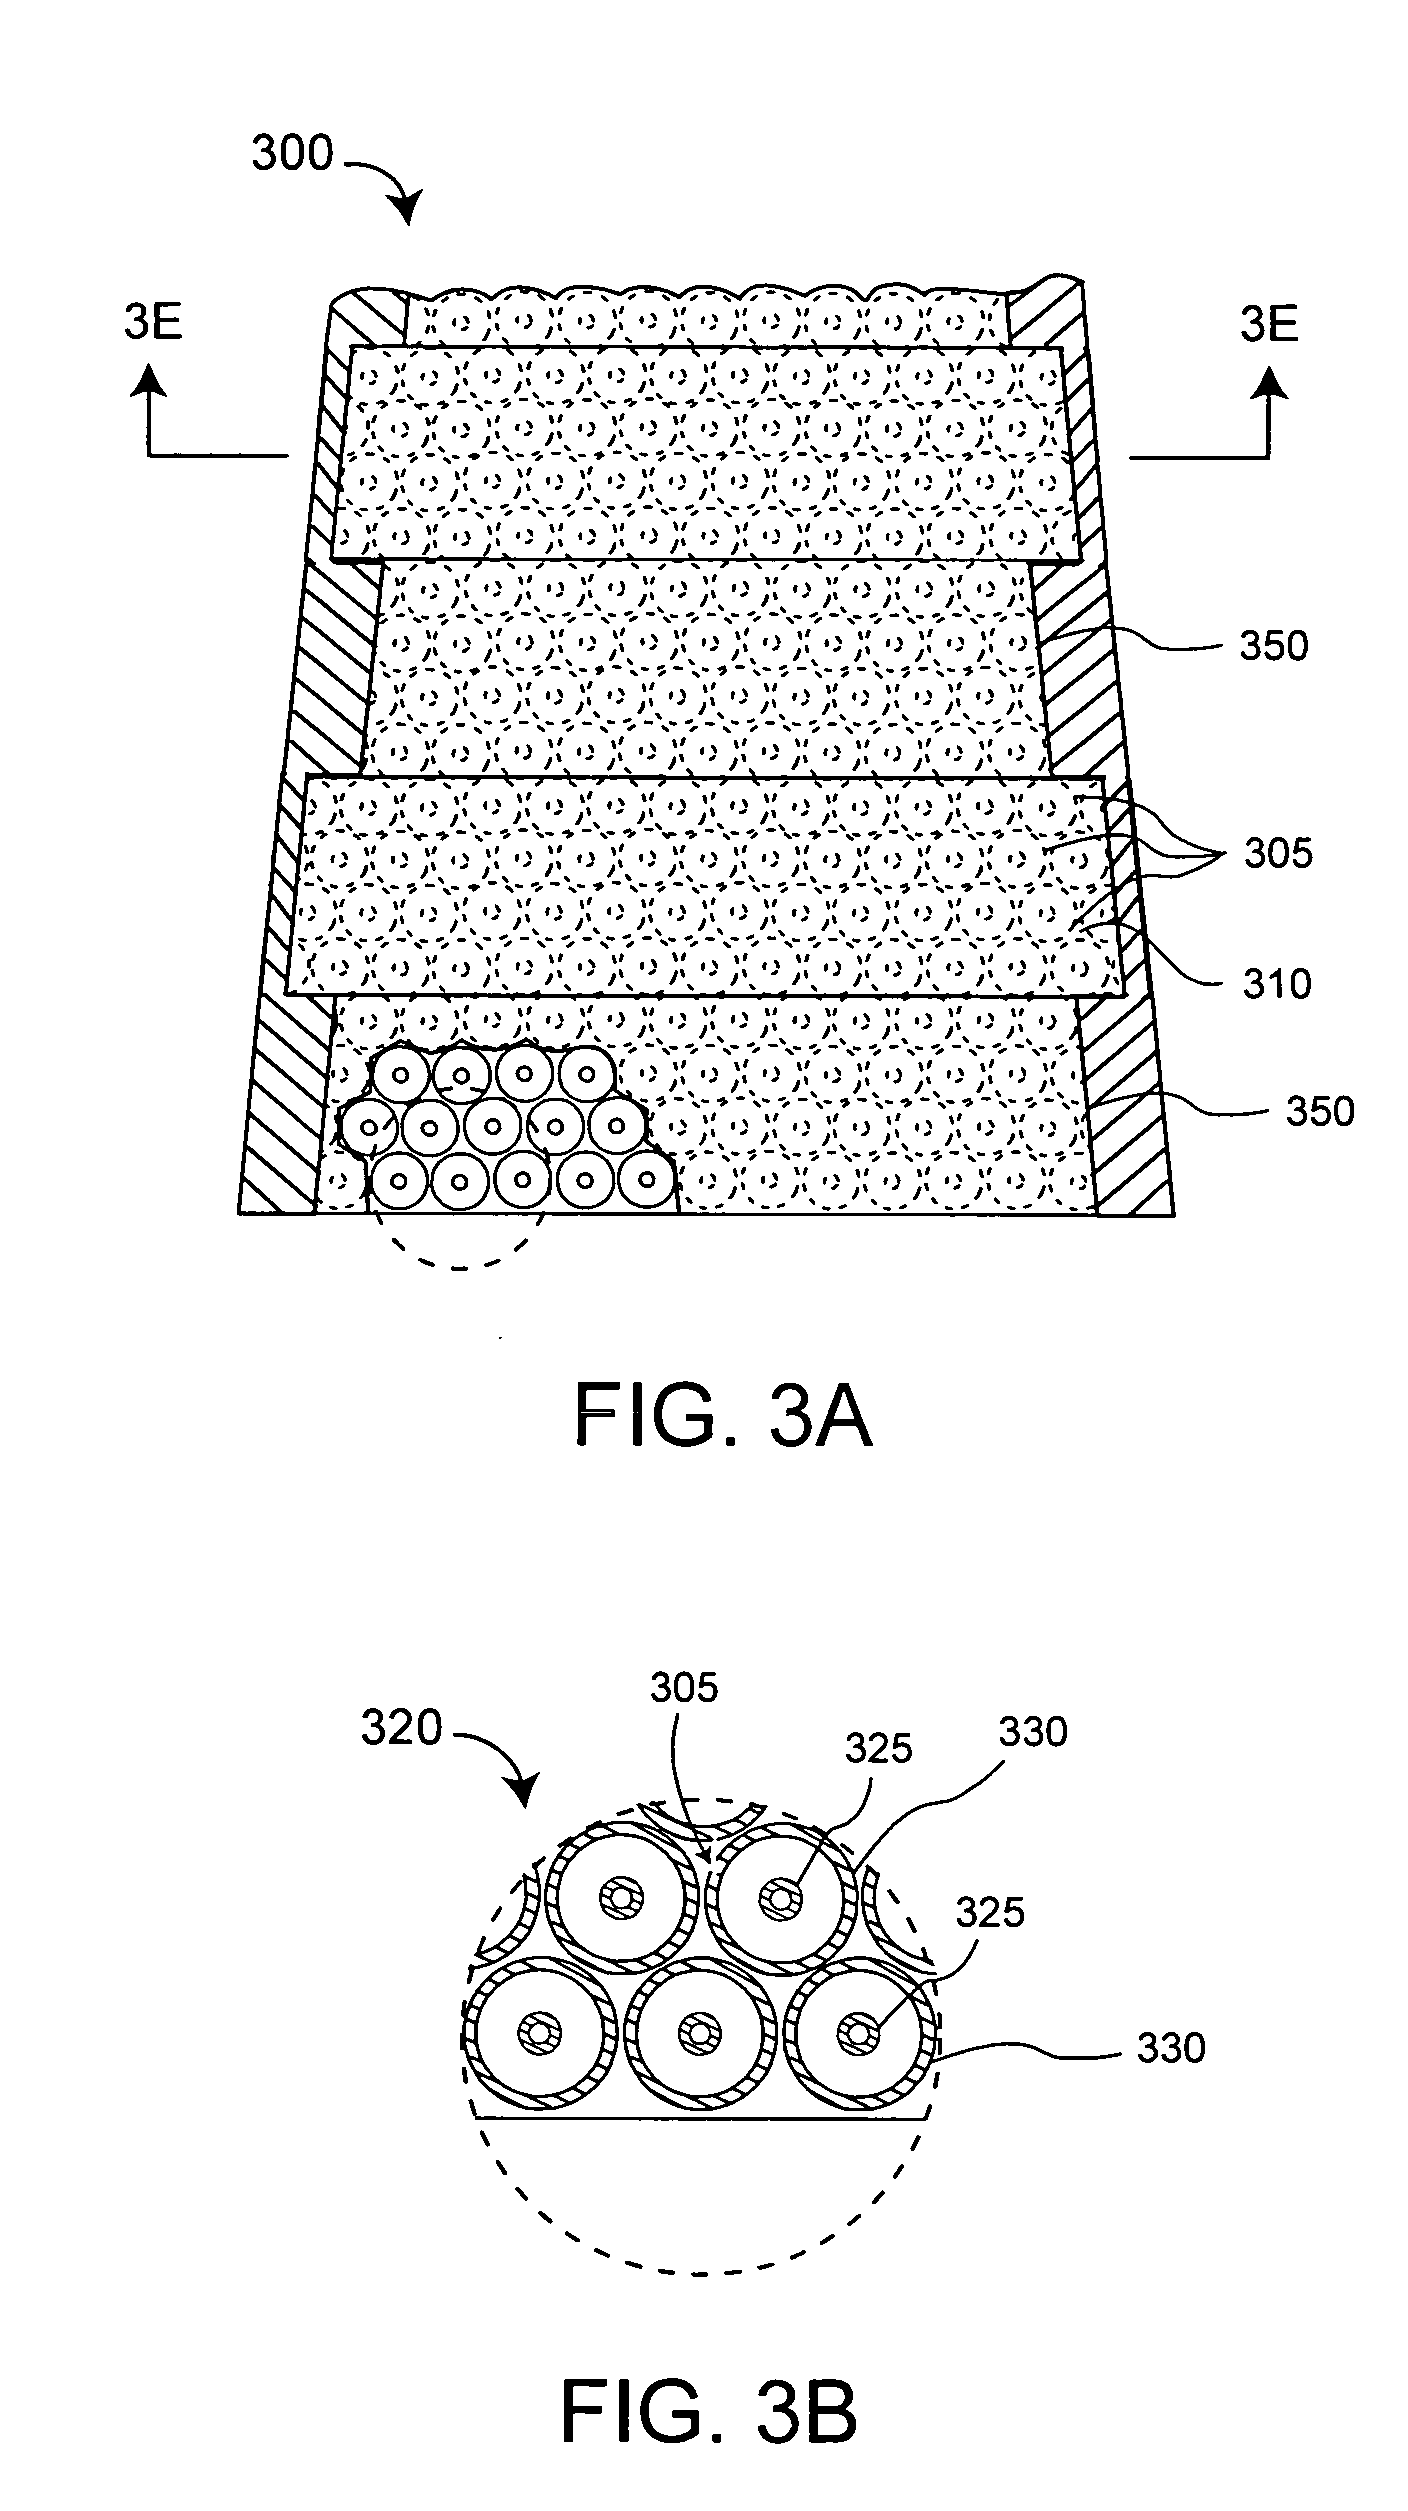 Multi-band horn antenna using corrugations having frequency selective surfaces